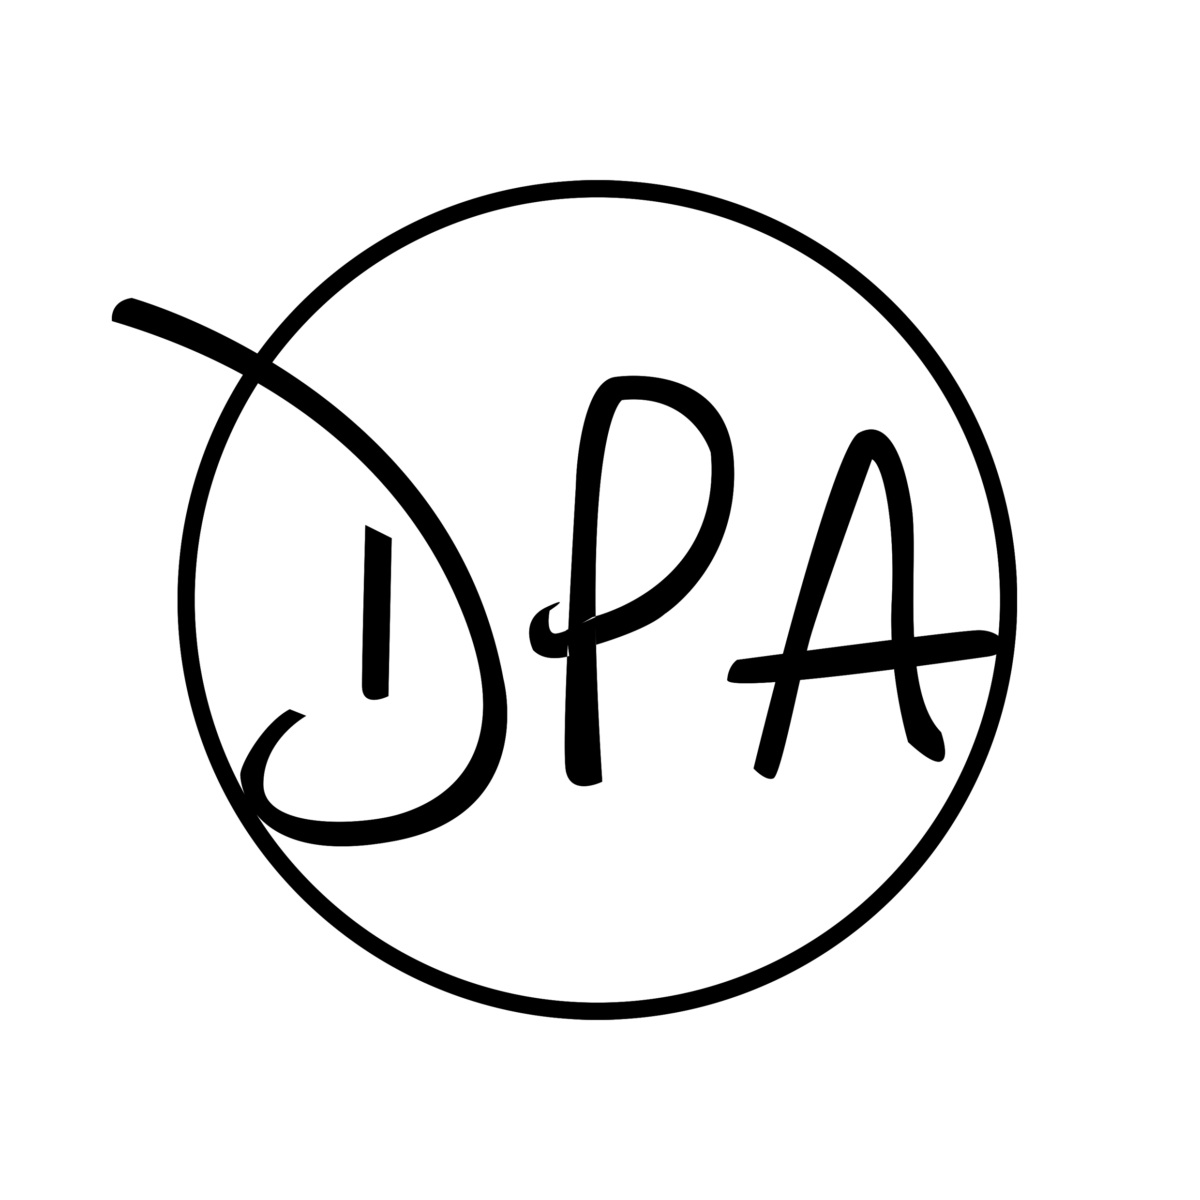 The letters "D P A" are written in black pen inside a black circle on a white background.